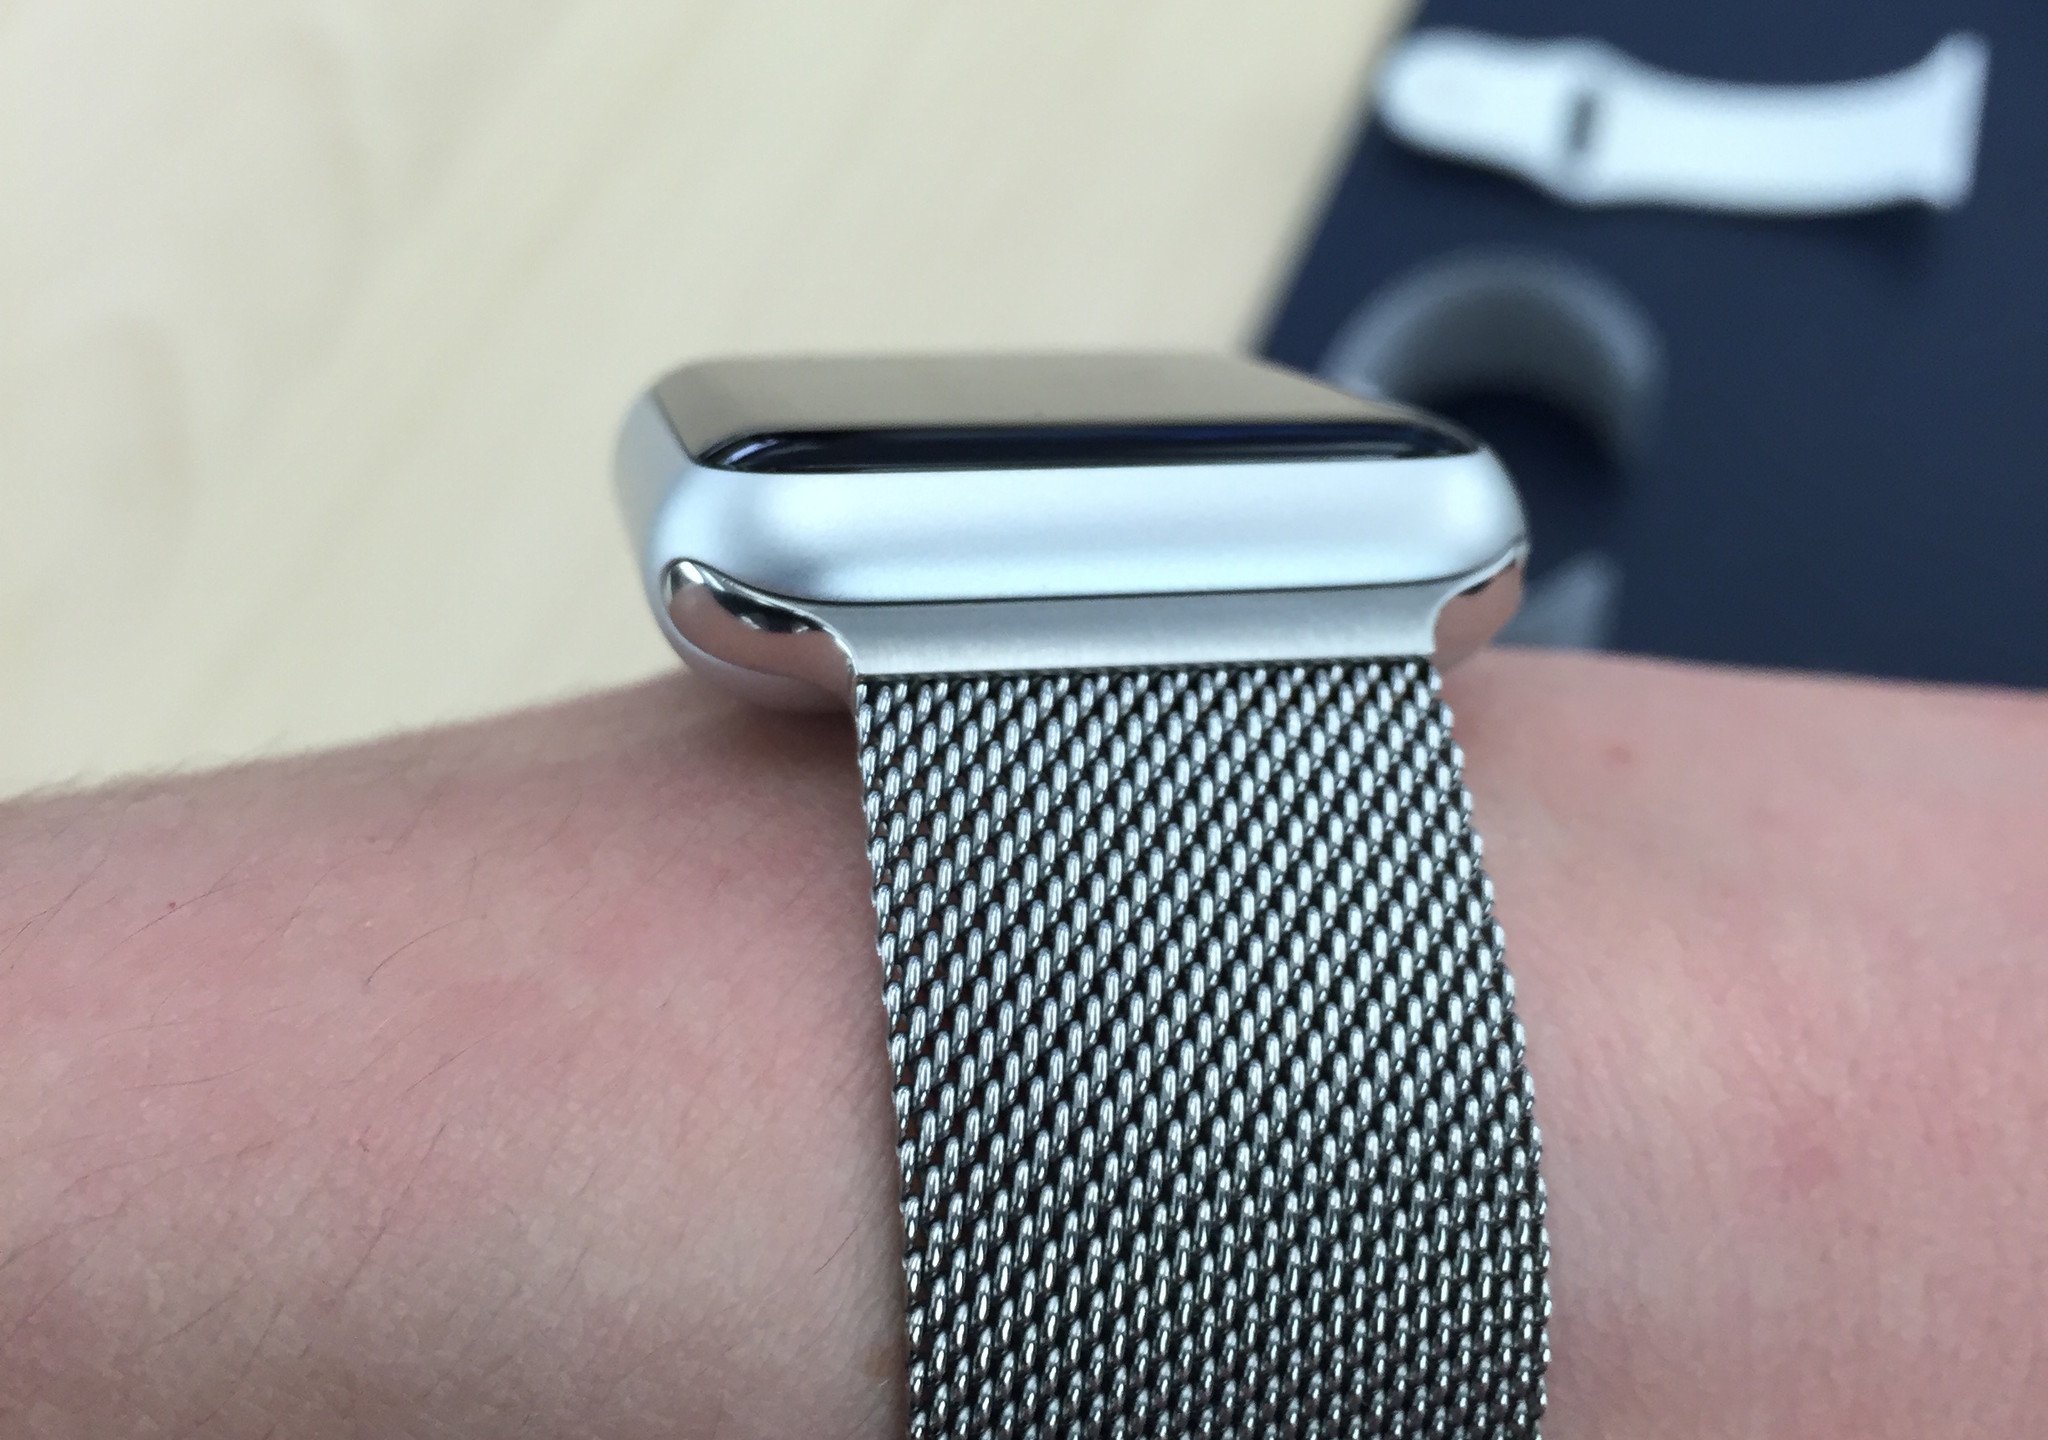 Here's what the Apple Watch Sport looks 